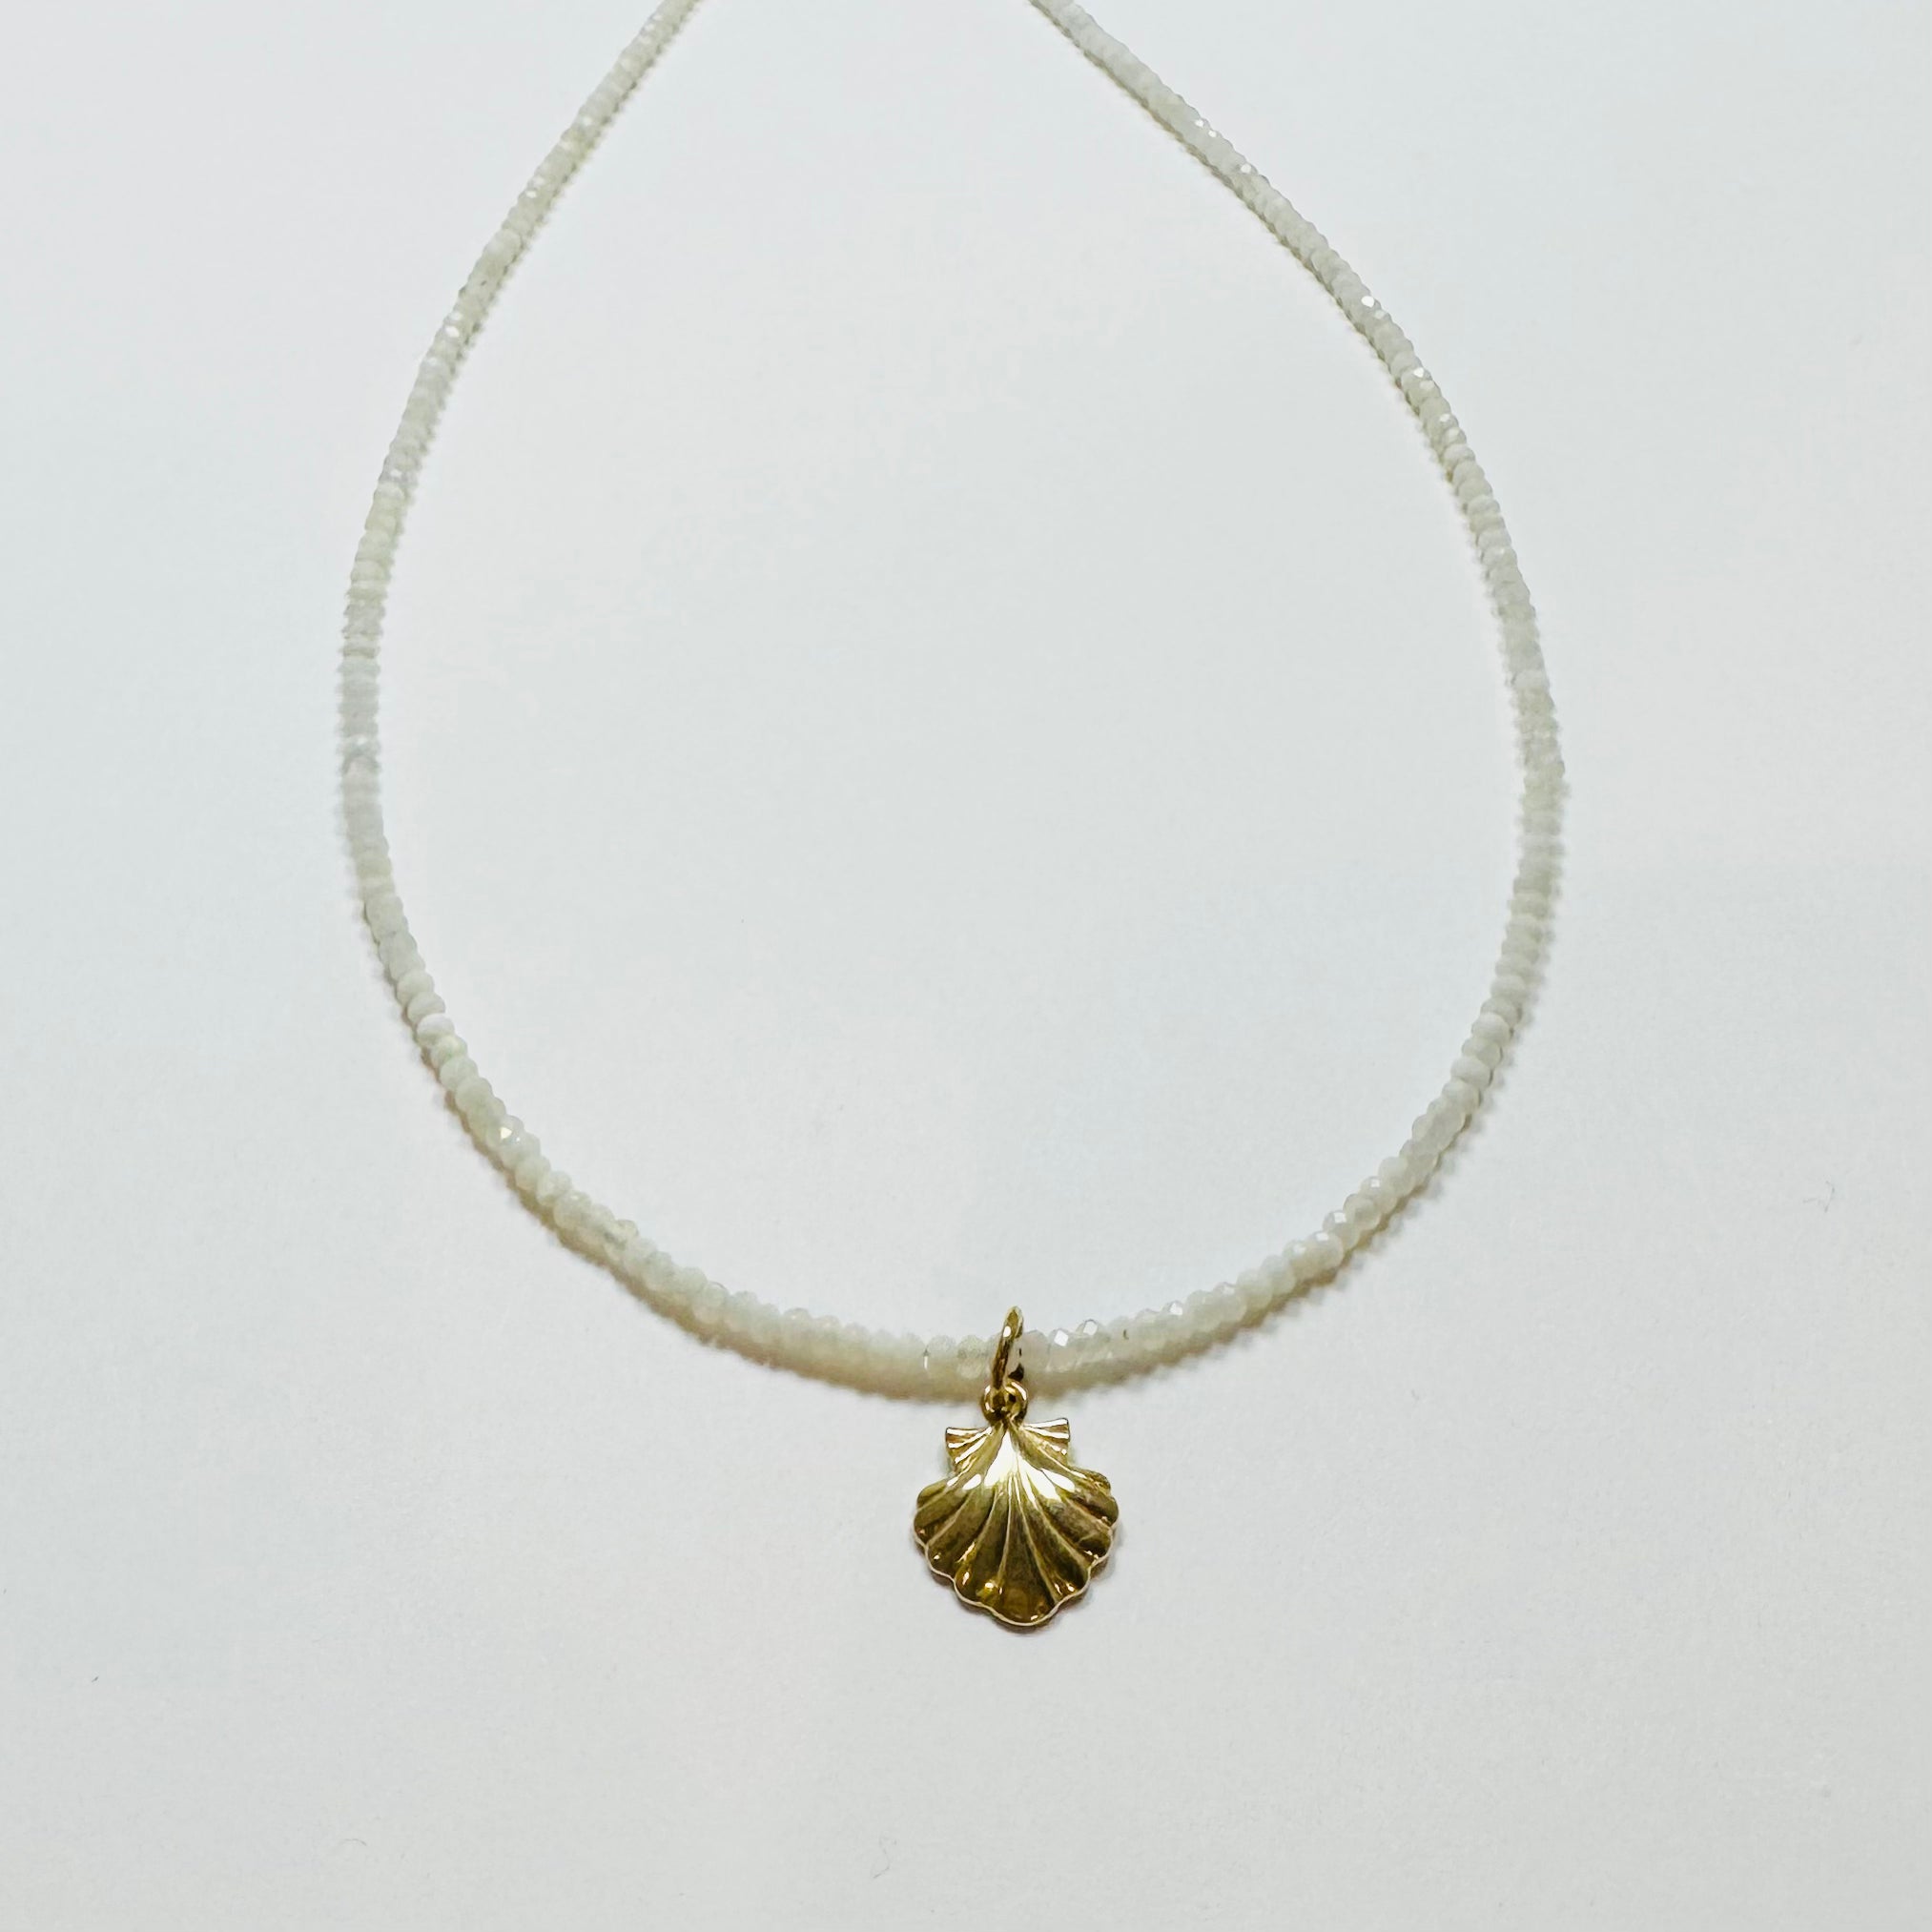 delicate moonstone necklace with shell